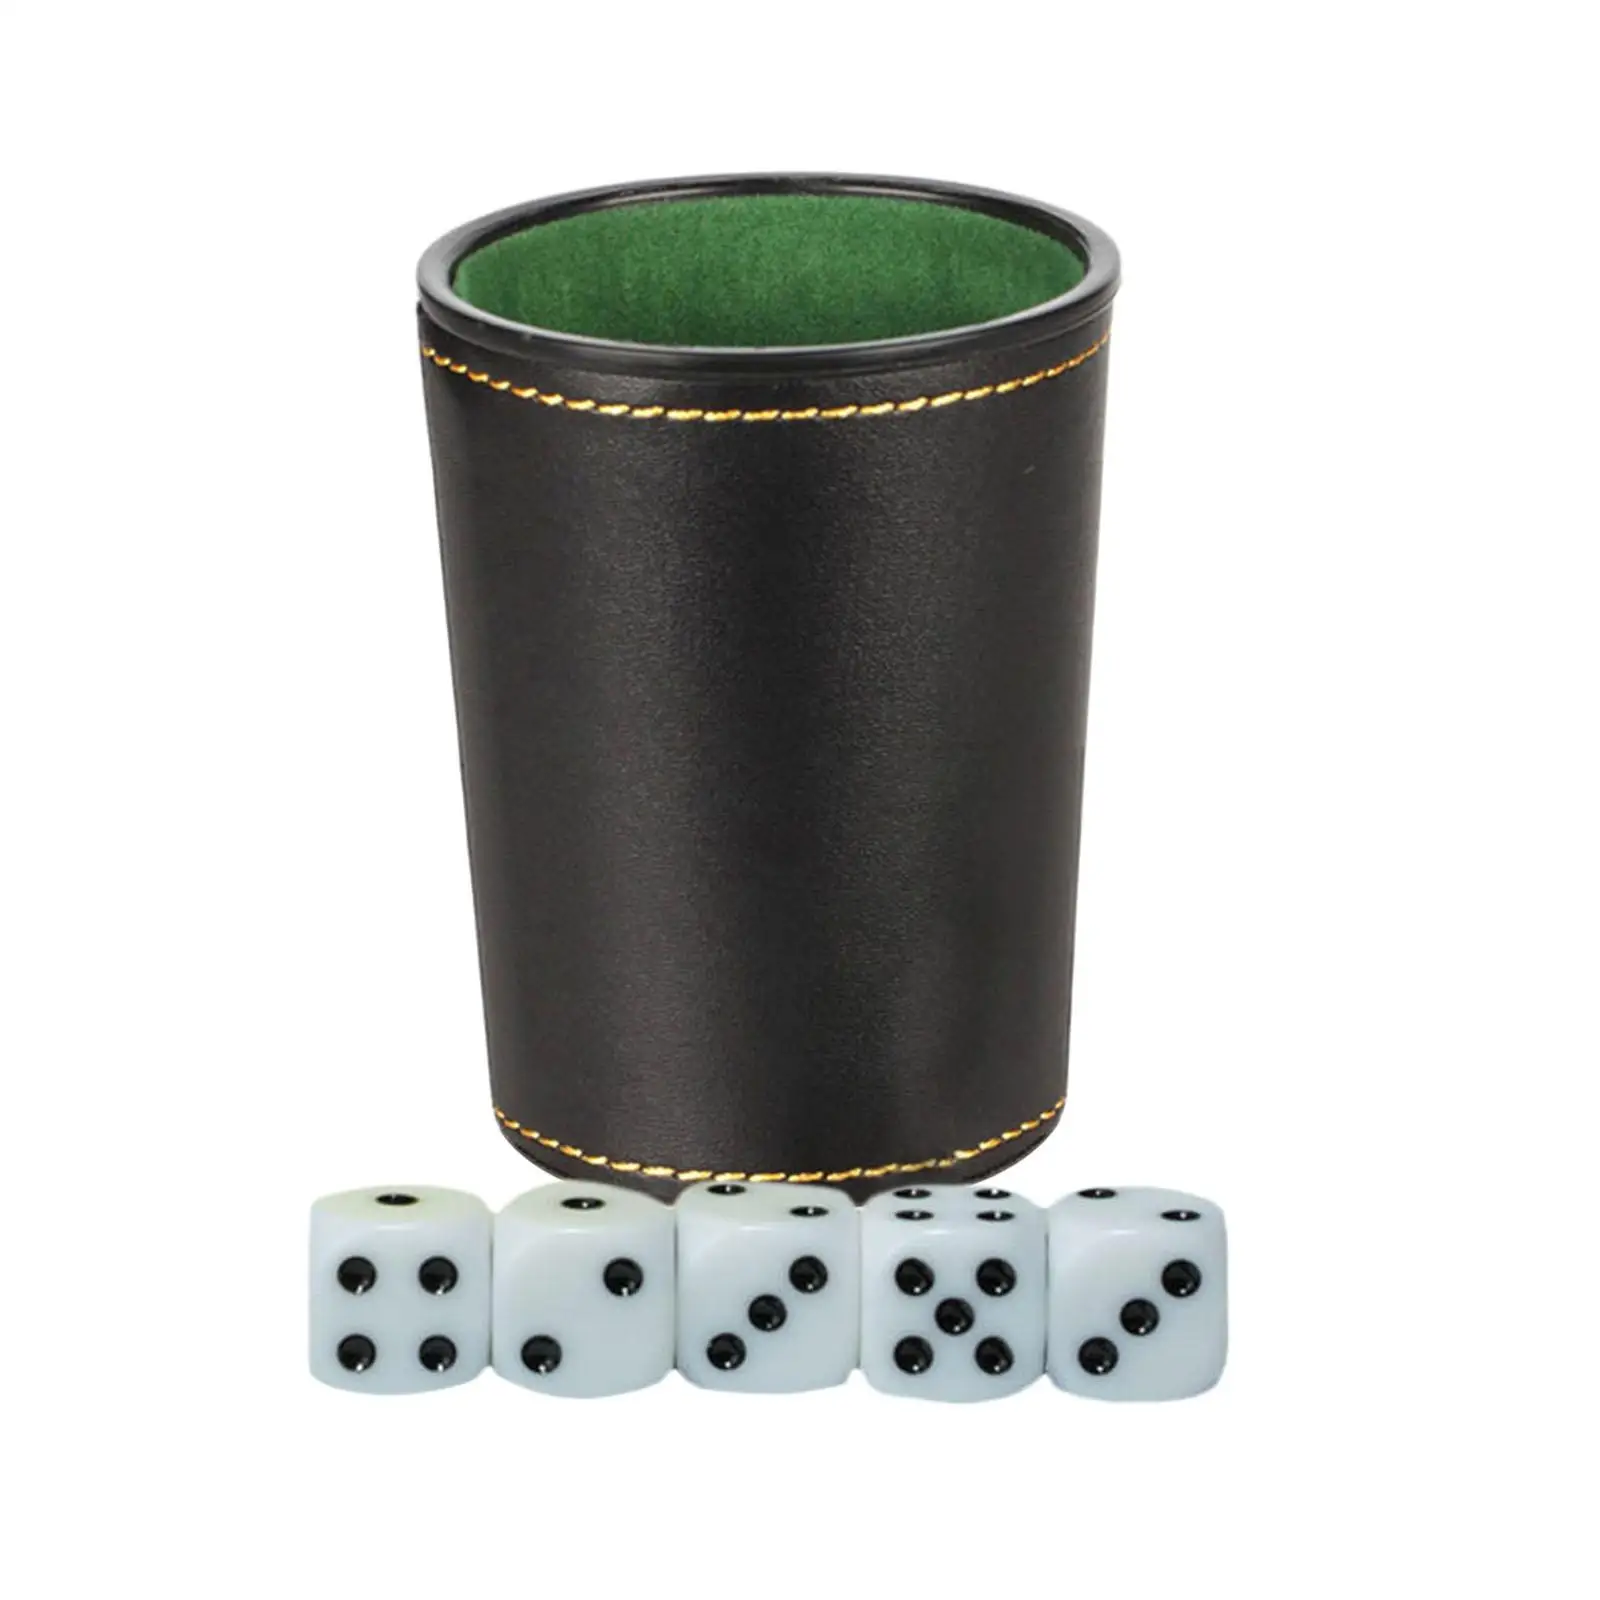 Professional  , W/ 5 s PU Leather for Table Games Party Indoor Entertainment